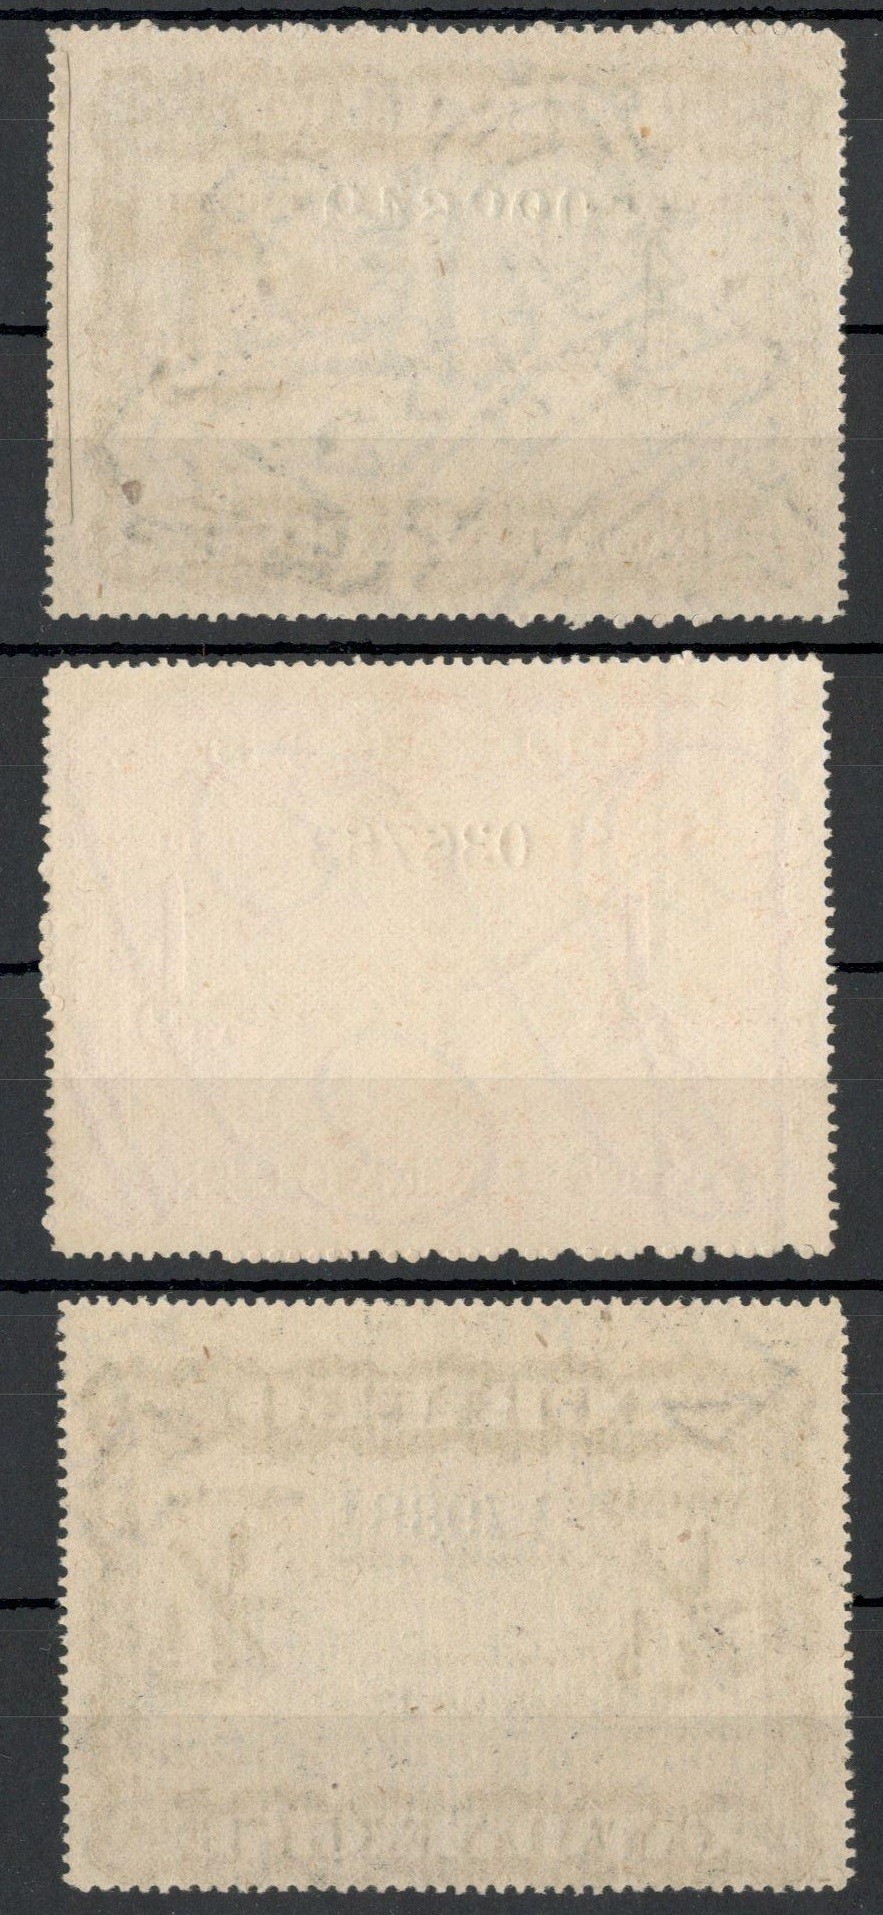 CANADA TOBACCO EXCISE STAMPS (3) - Image 2 of 2